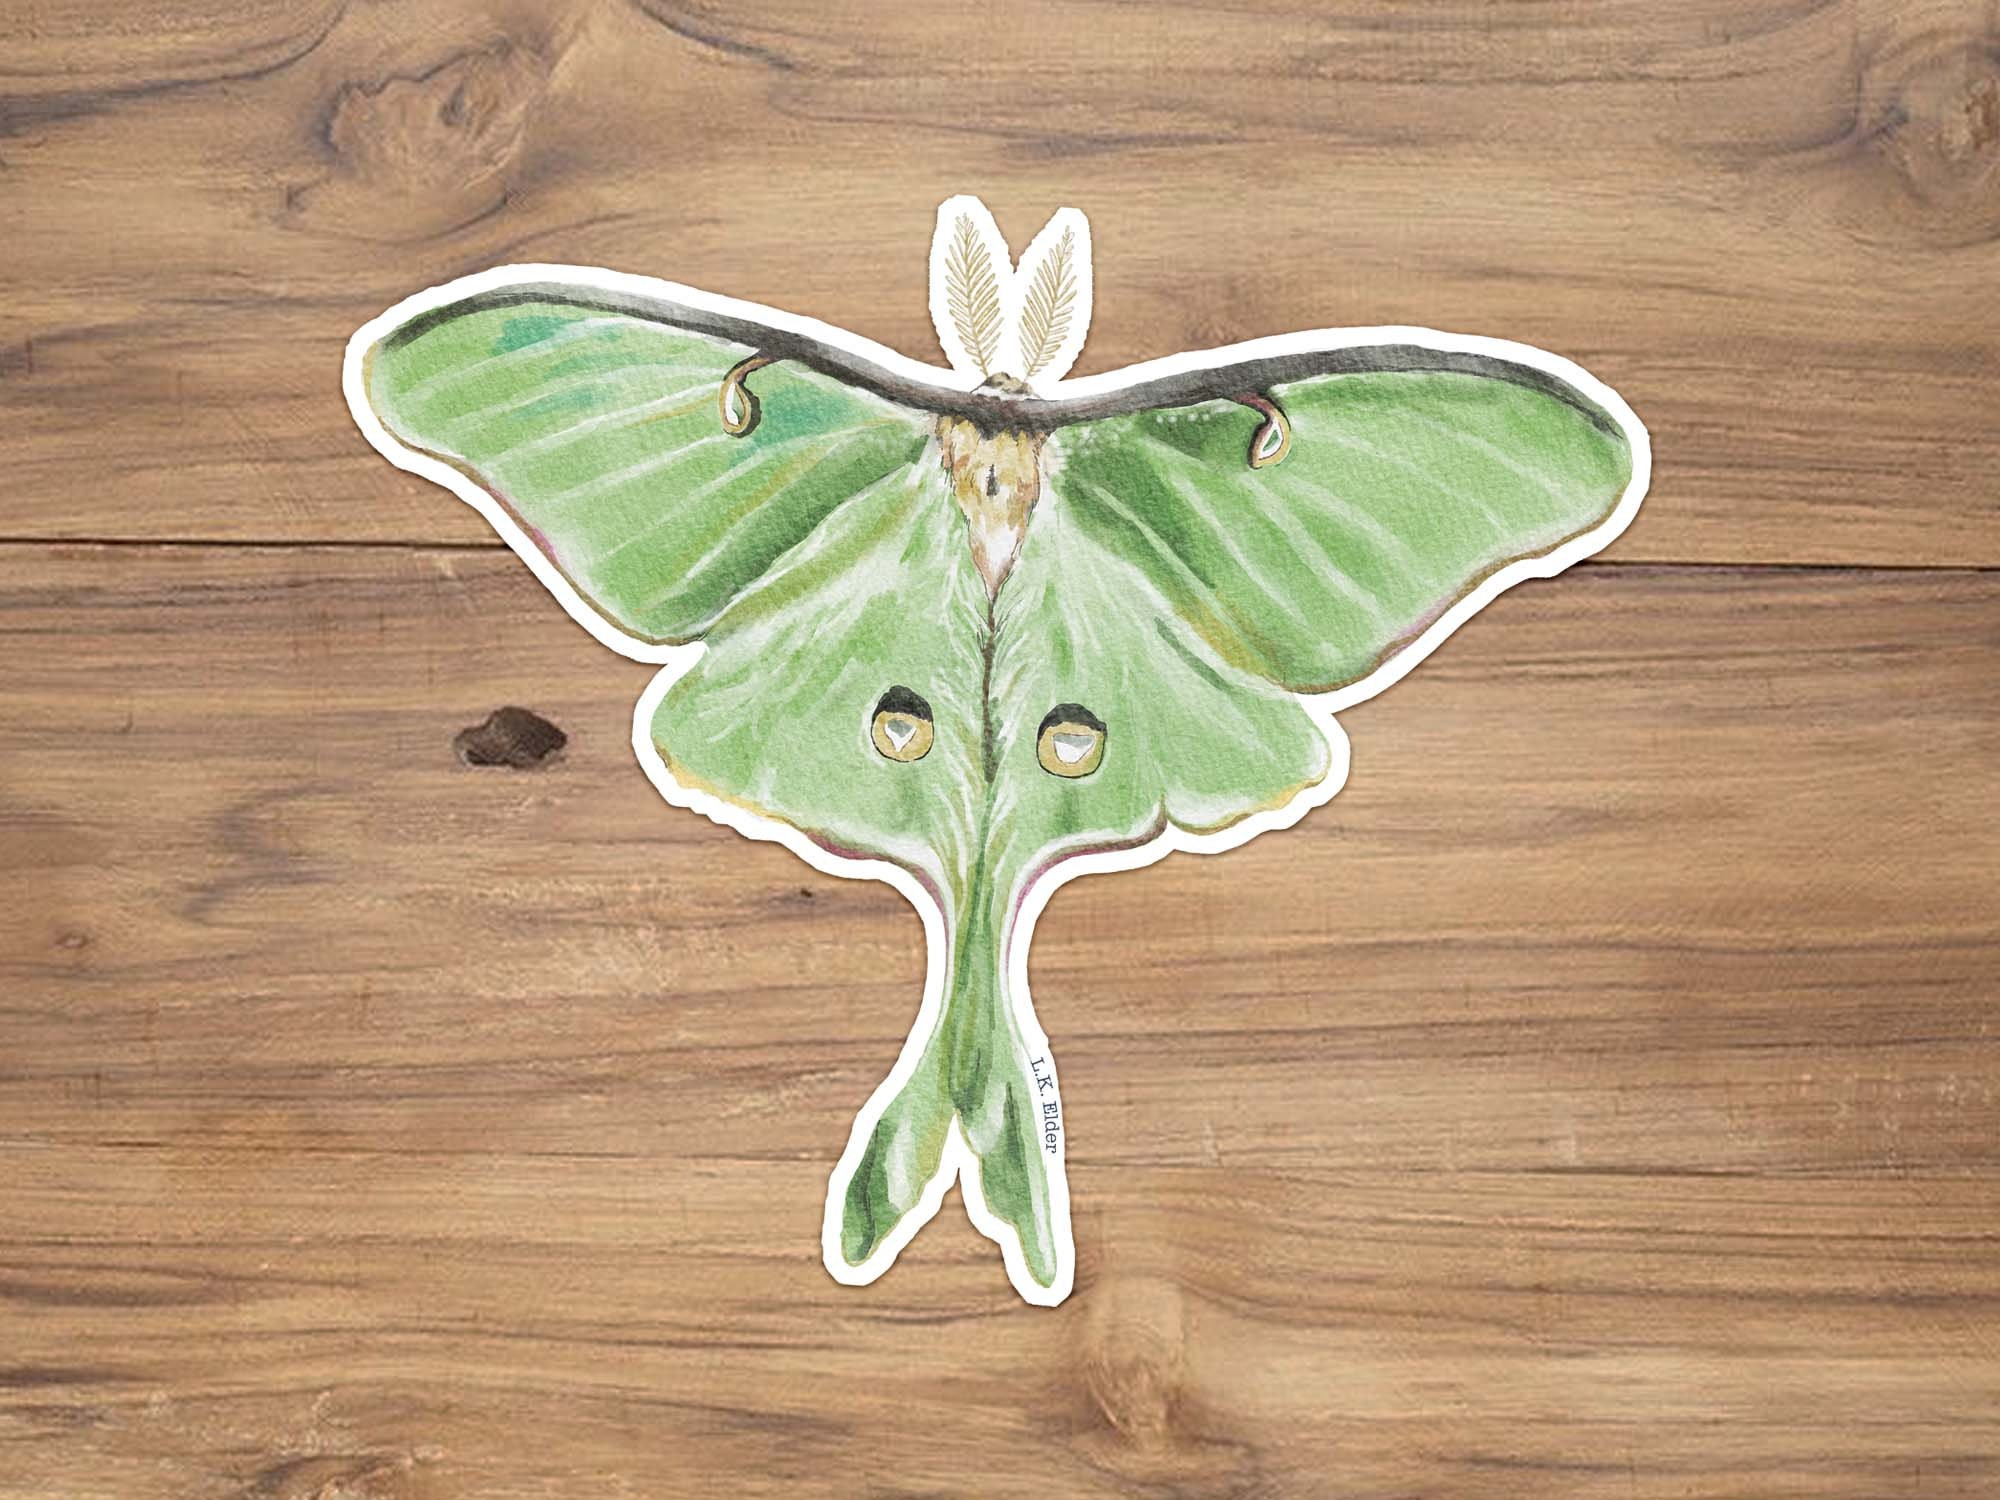 Moth Stickers for Scrapbook, Animal Aesthetic Stickers, 50pcs Colorful Cartoon Moth Stickers, Waterproof Vinyl Stickers Bulk for Water Bottles